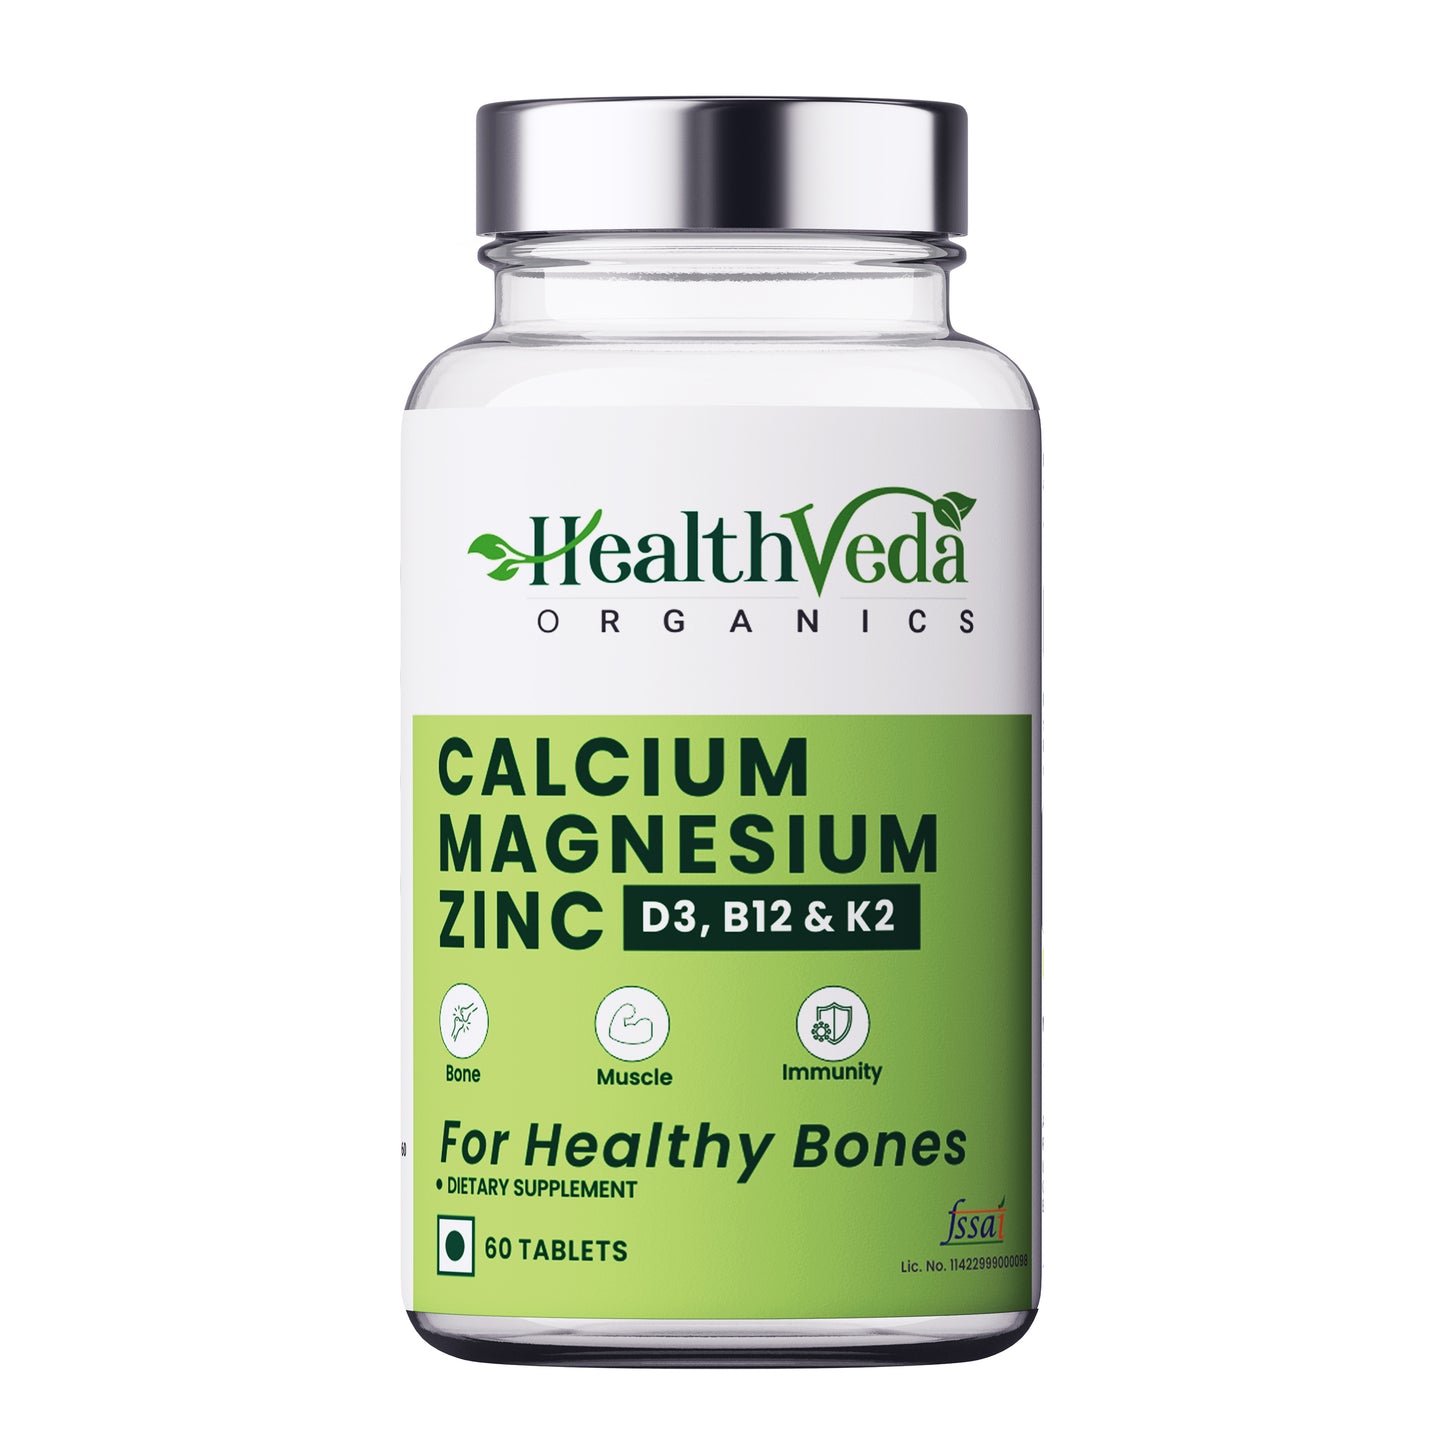 Health Veda Organics Calcium, Magnesium, Zinc with Vitamin D3 & B12, 1000mg I 60 Veg Tablets | Support Strong Bones, Joints & Muscles | For Both Men & Women